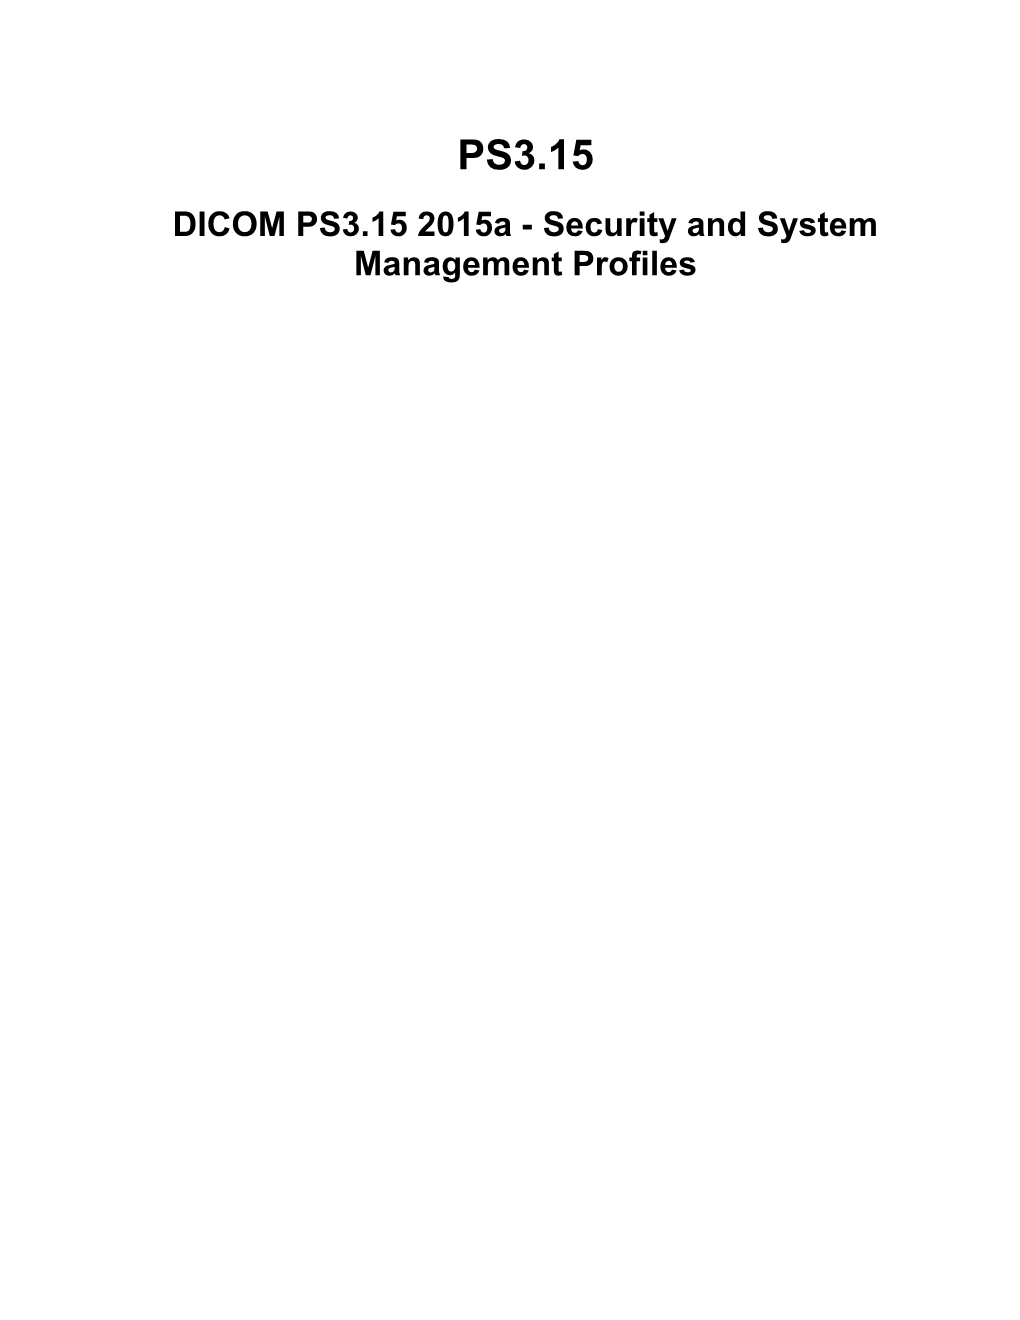 DICOM PS3.15 2015A - Security and System Management Profiles